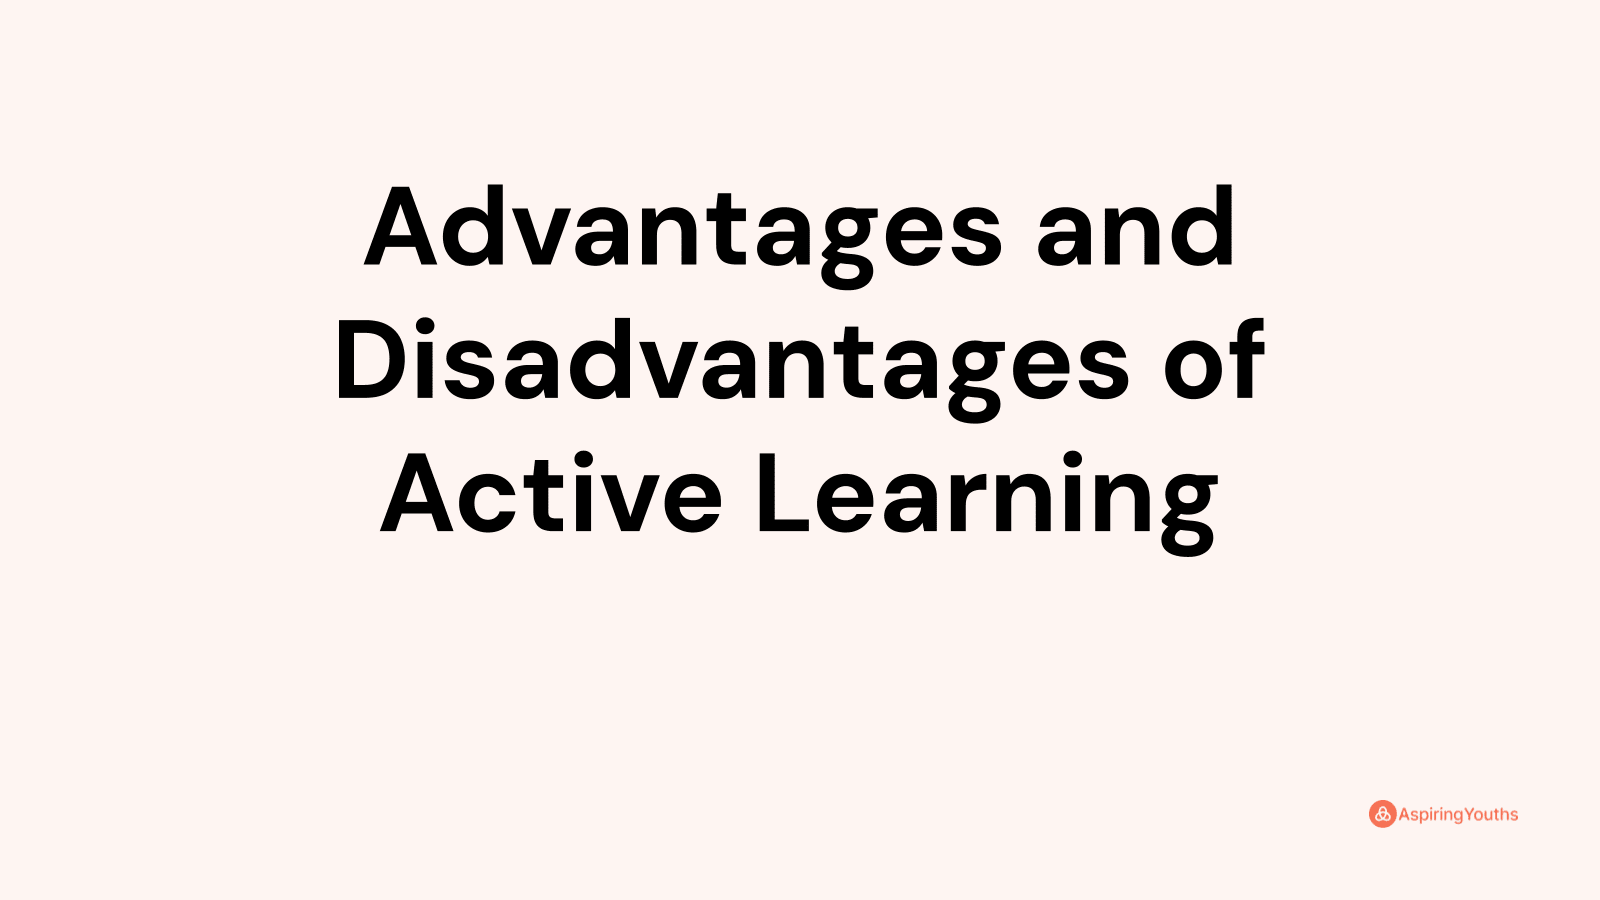 Advantages and disadvantages of Active Learning